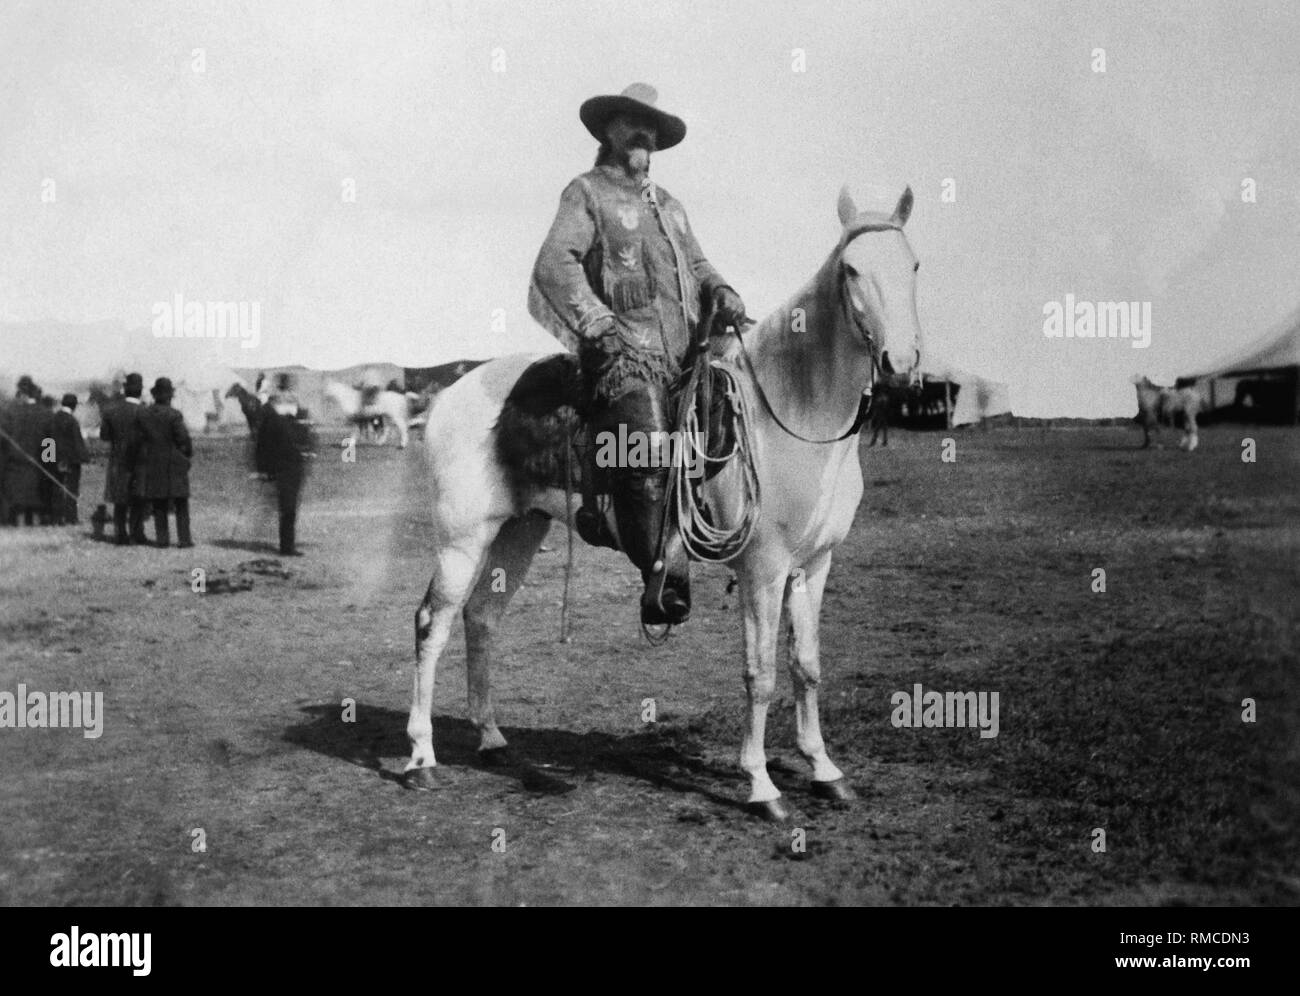 Buffalo Bill, real name William Frederick Cody (1846-1917), American scout  in the Indian wars. In 1887 he brought the first Wild West show to Europe.  On the picture (around 1892) he is